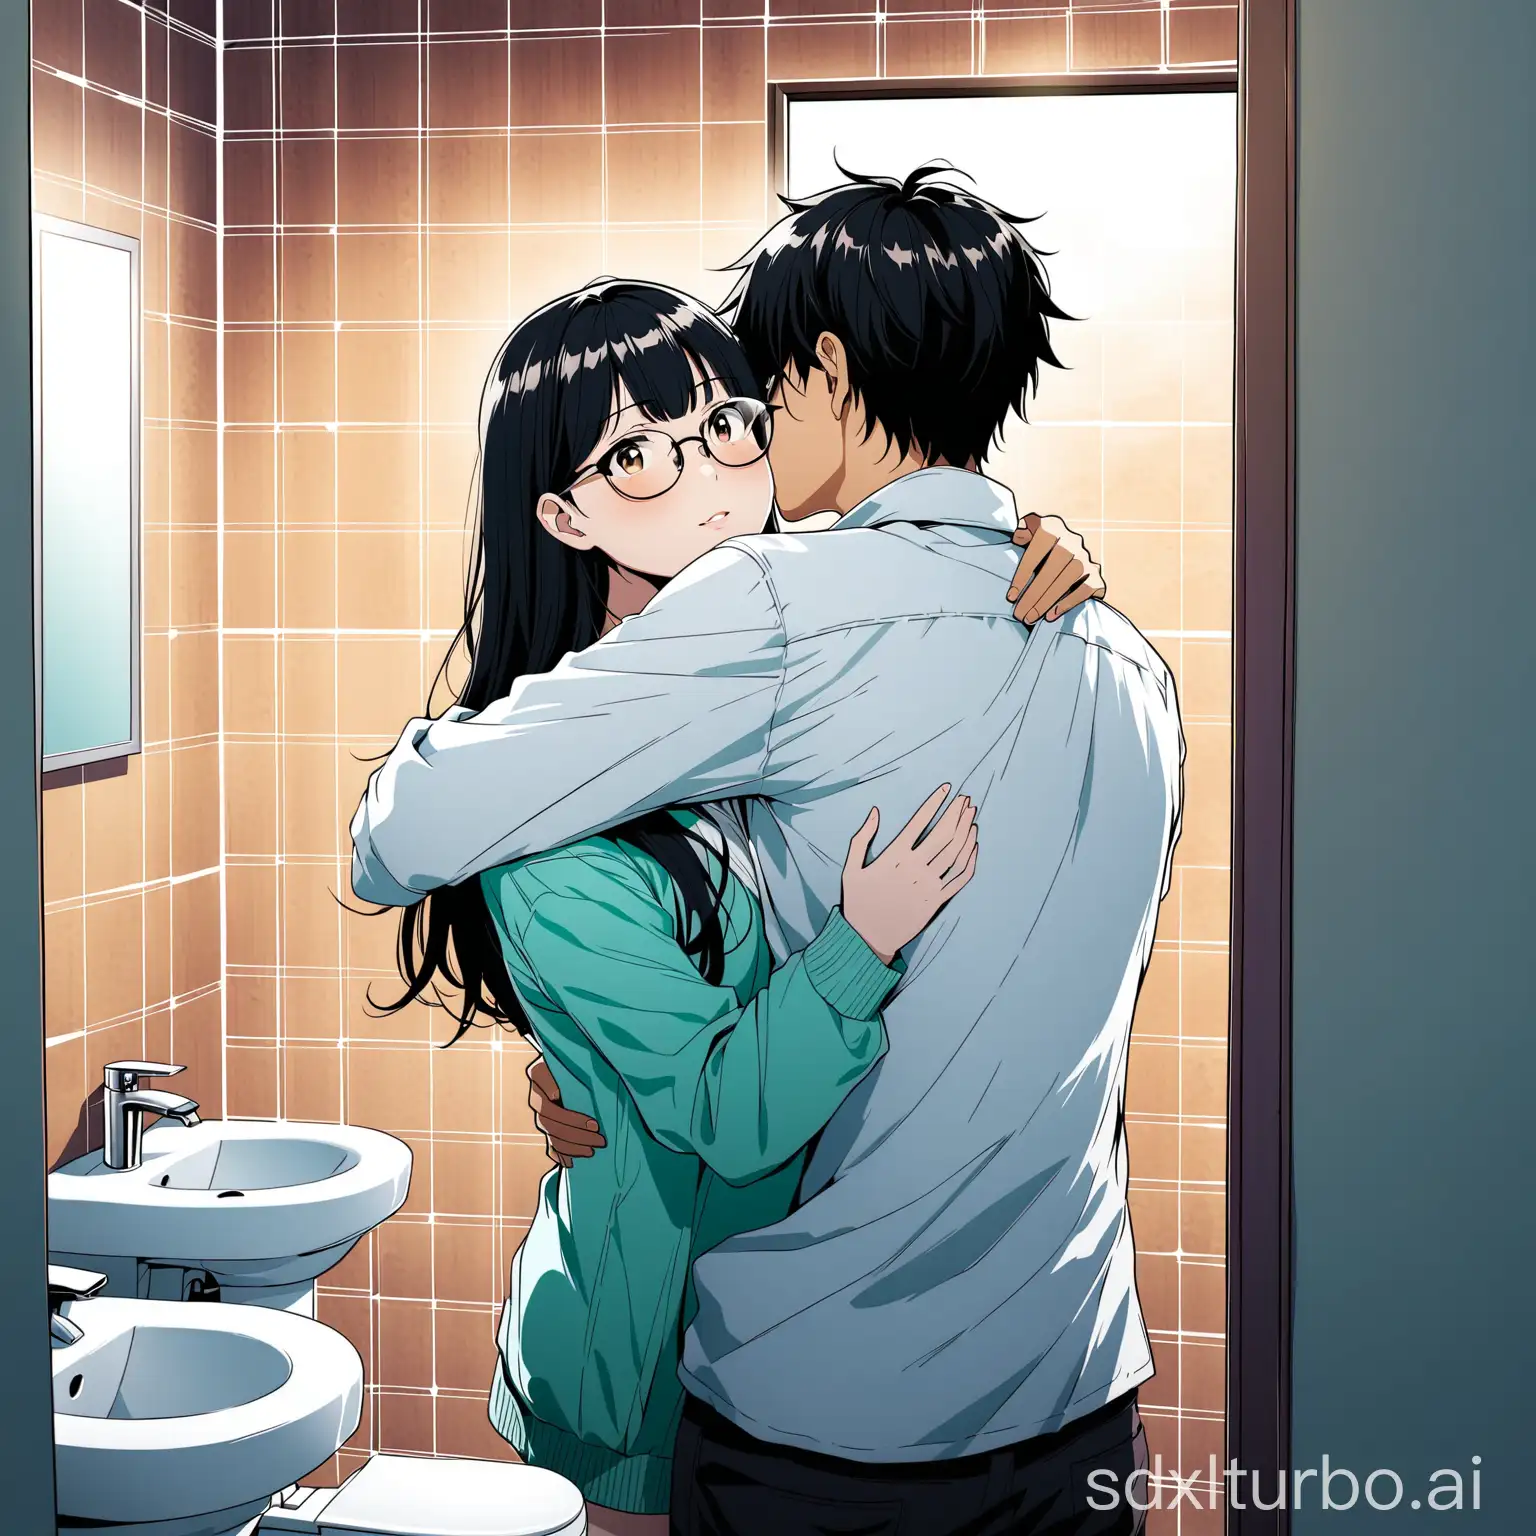 Full view, in a bathroom, a young adult man, beautiful, white skin, black hair, long, messy and with bangs, dark circles, glasses, hugging an Asian girl, from behind